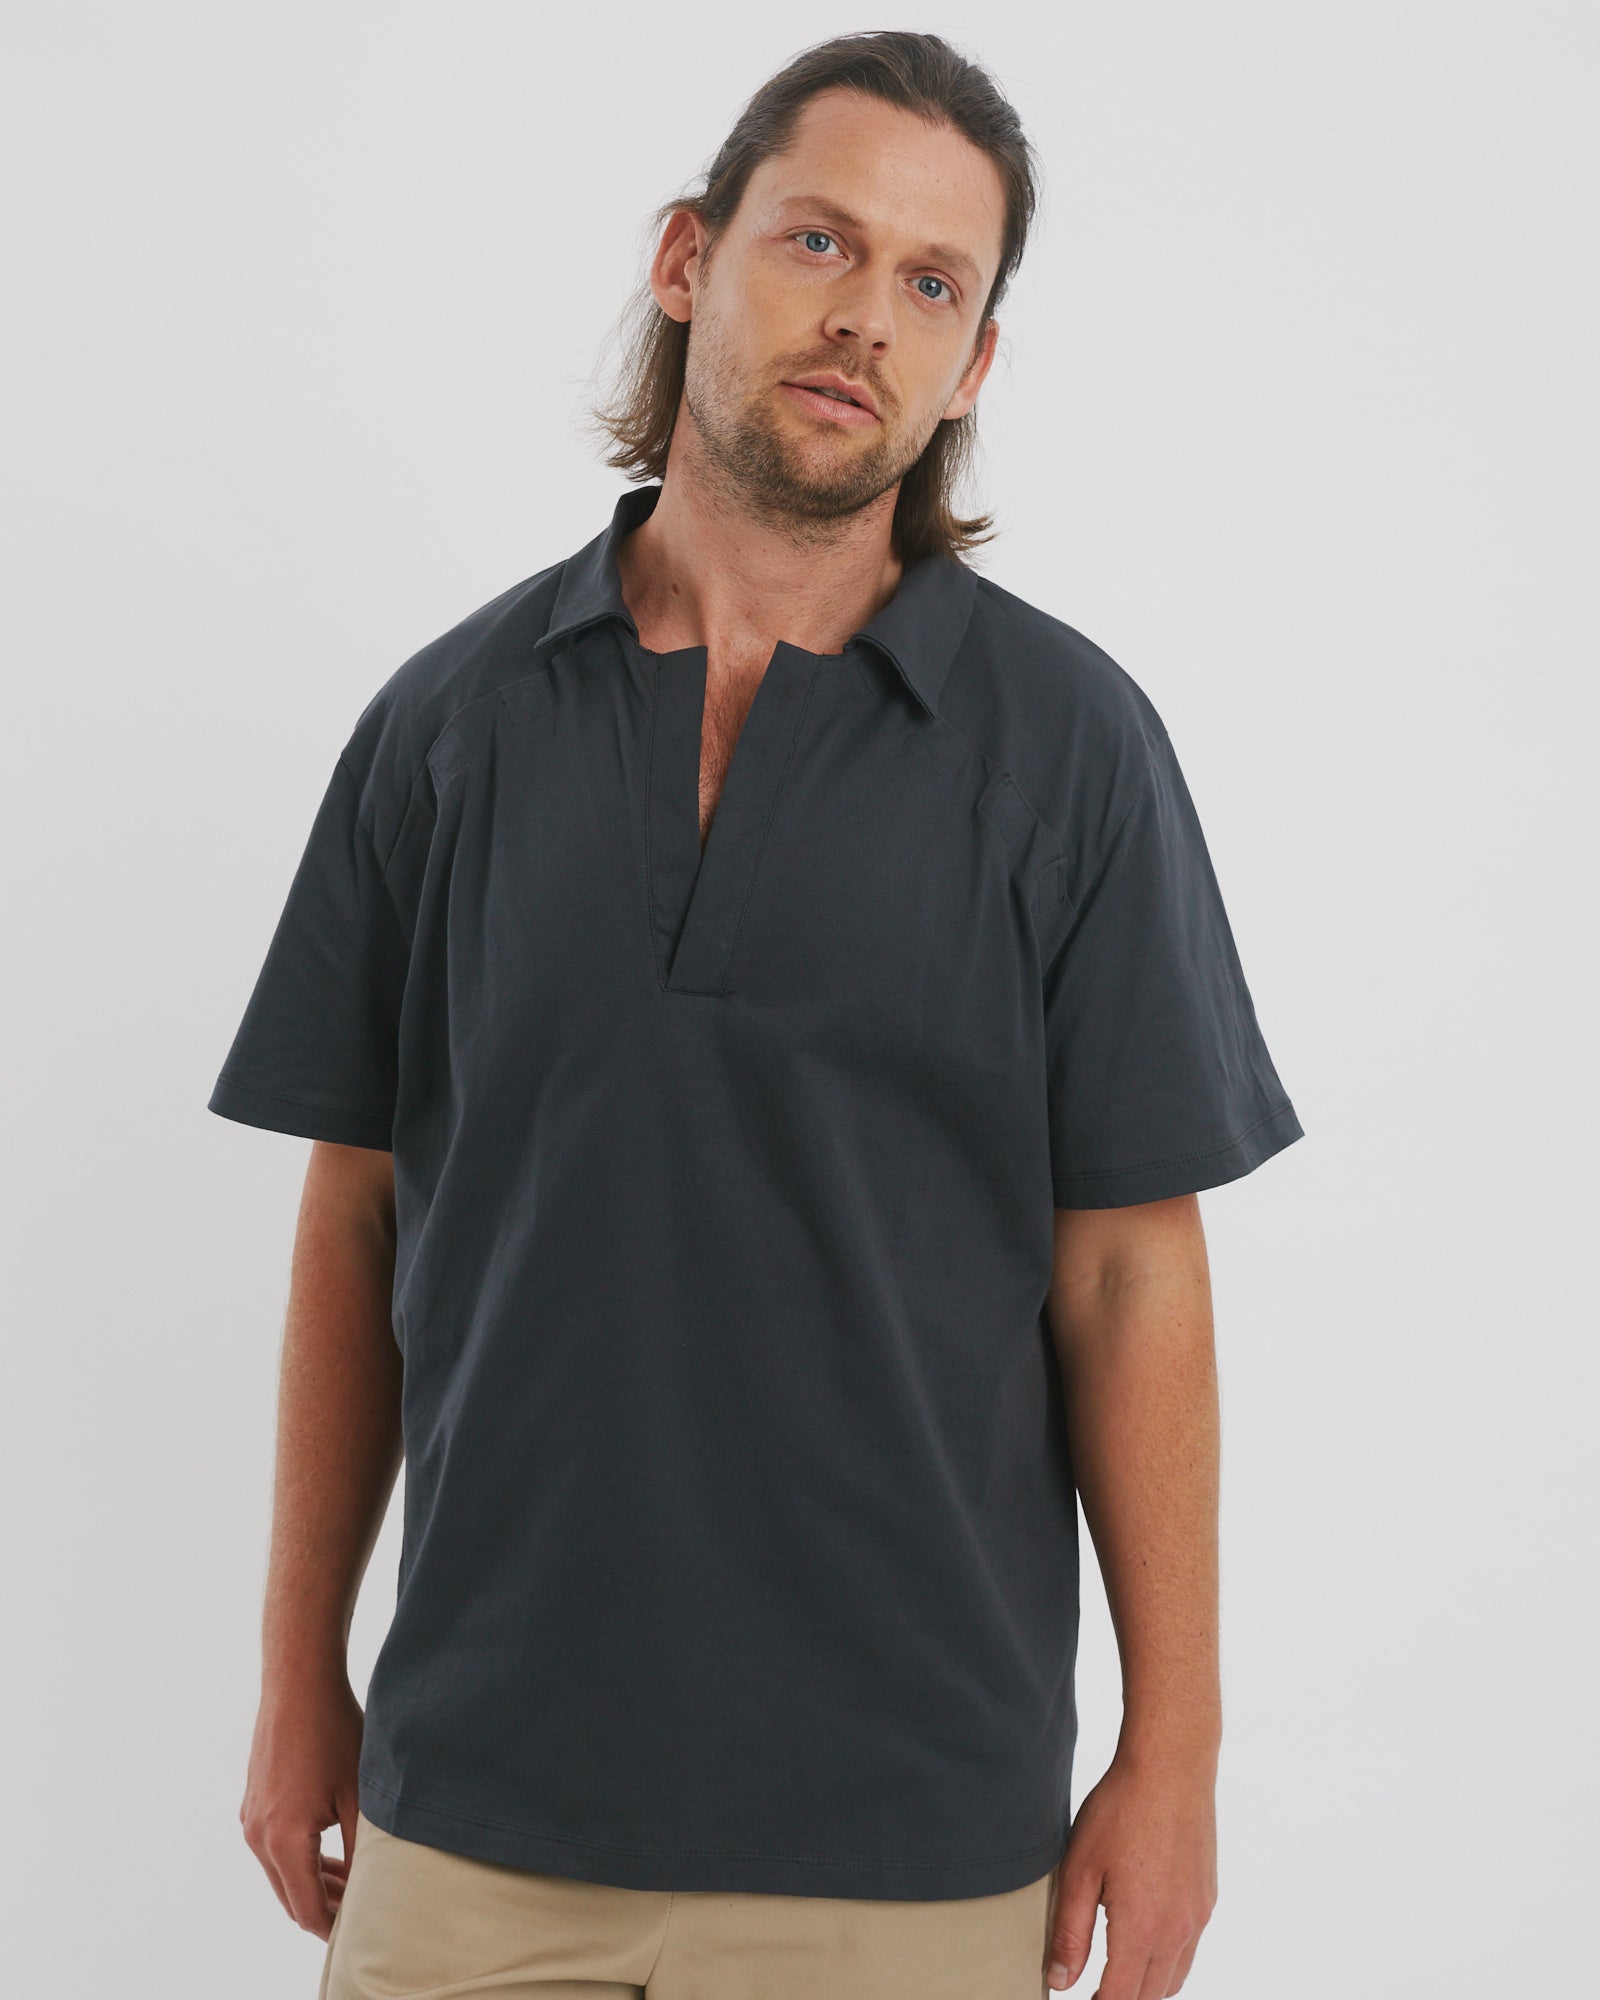 The Top  Fastening Polo Shirt  The Shapes United Polo Shirt.